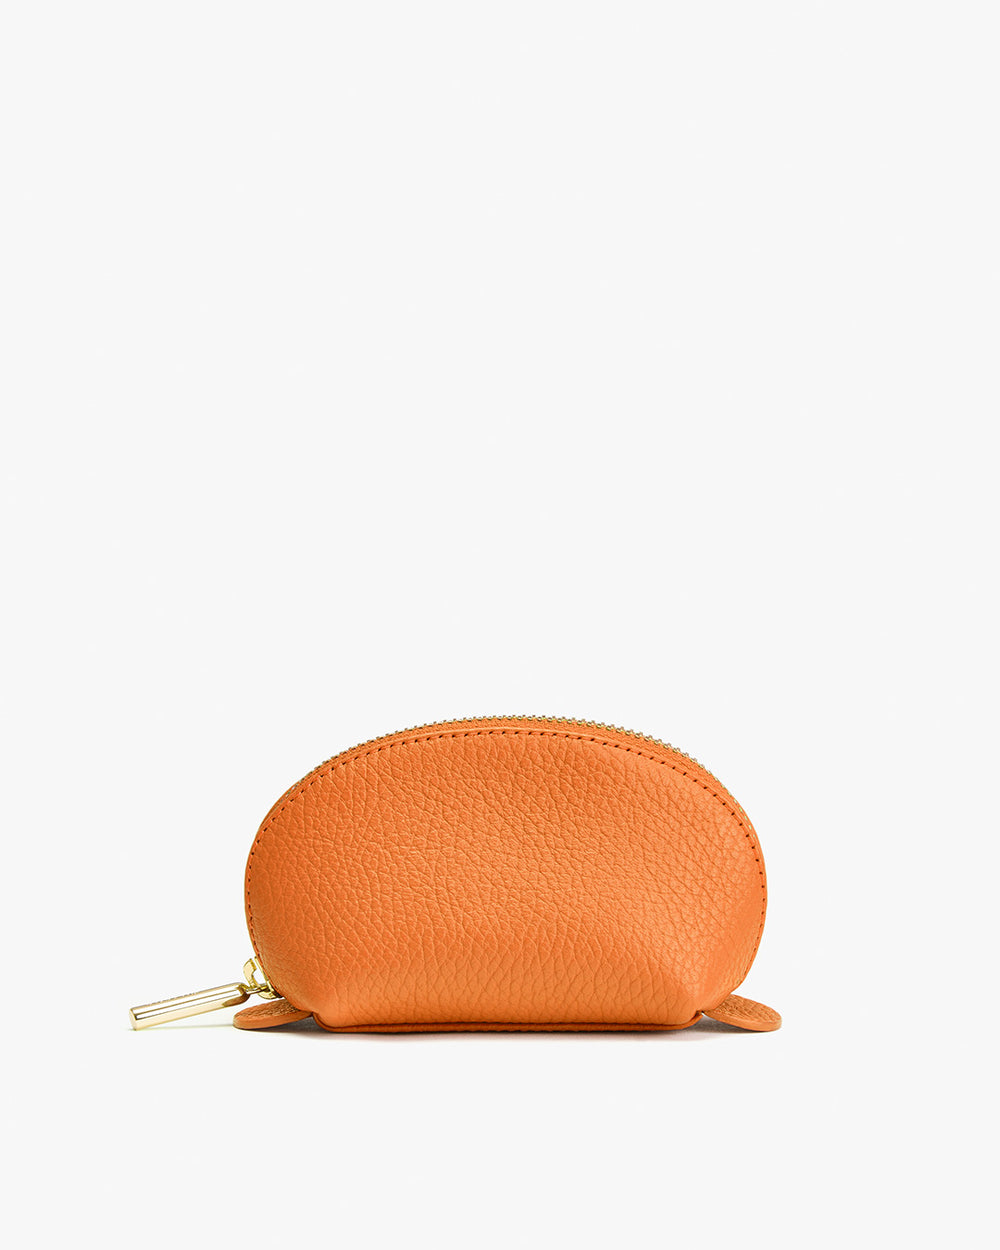 Small, rounded pouch with zip closure